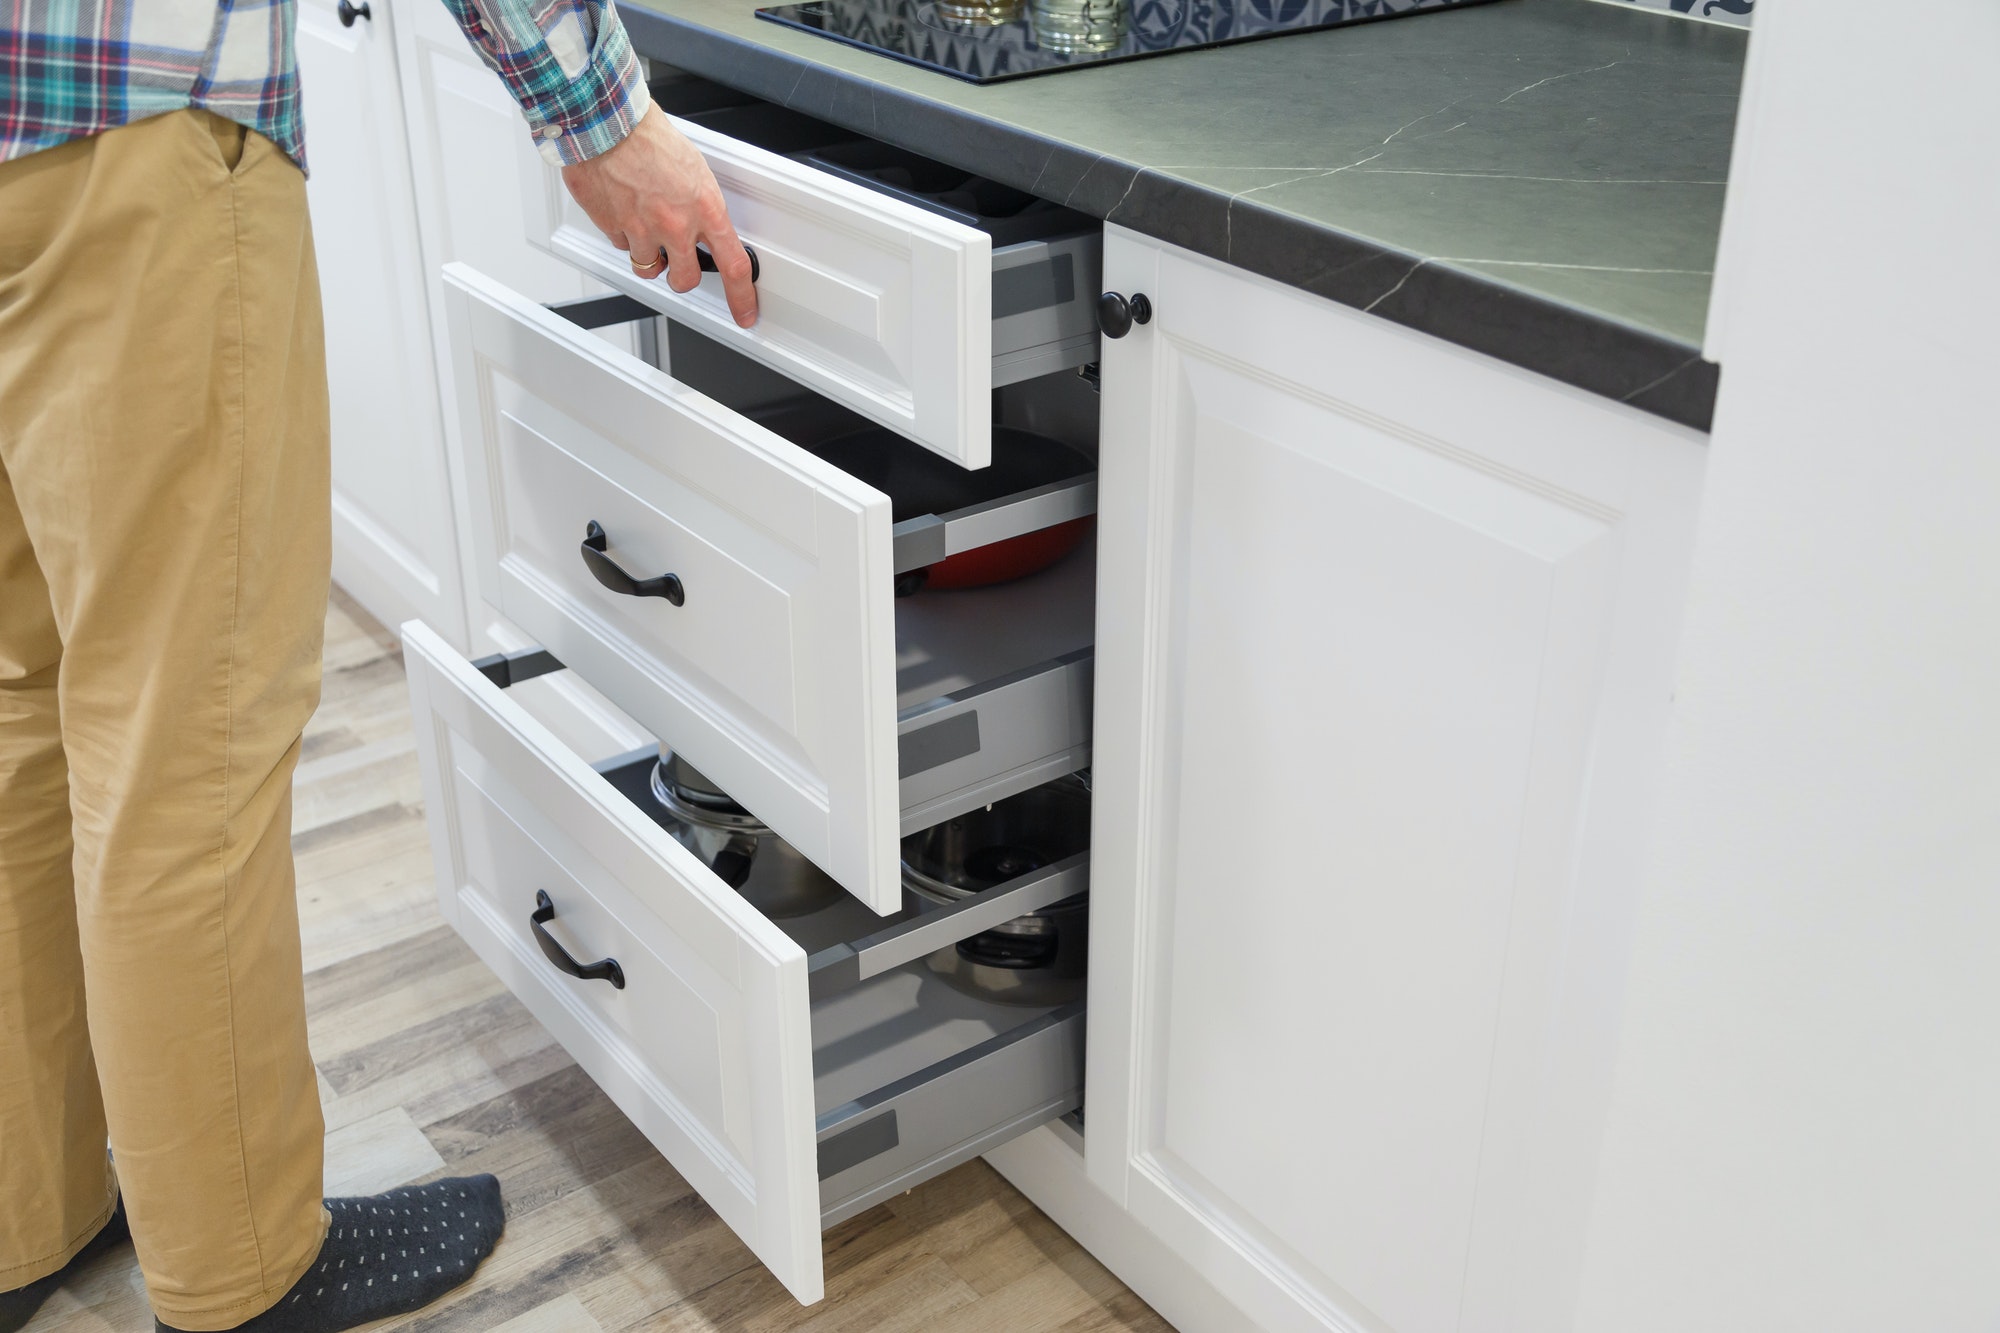 How To Install A Drawer In A Cabinet